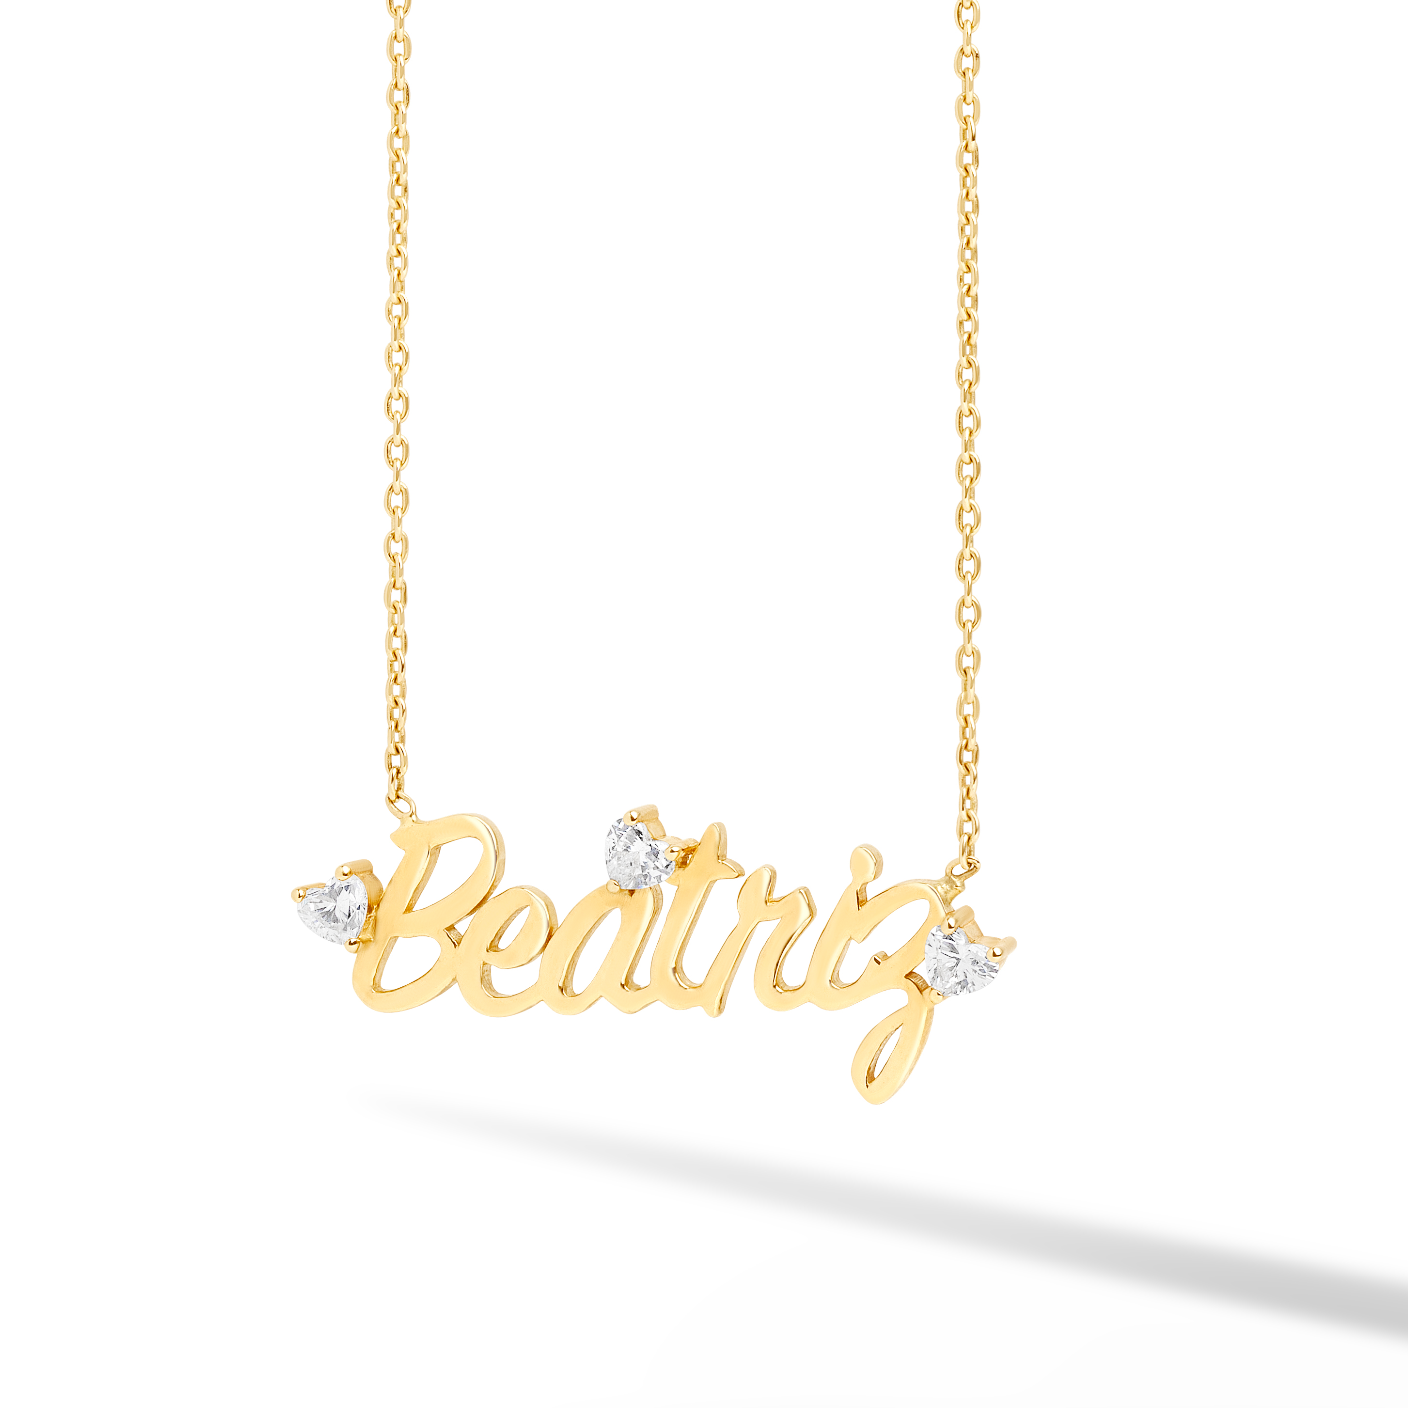 Custom Name Necklace with Floating Heart Diamond Detail